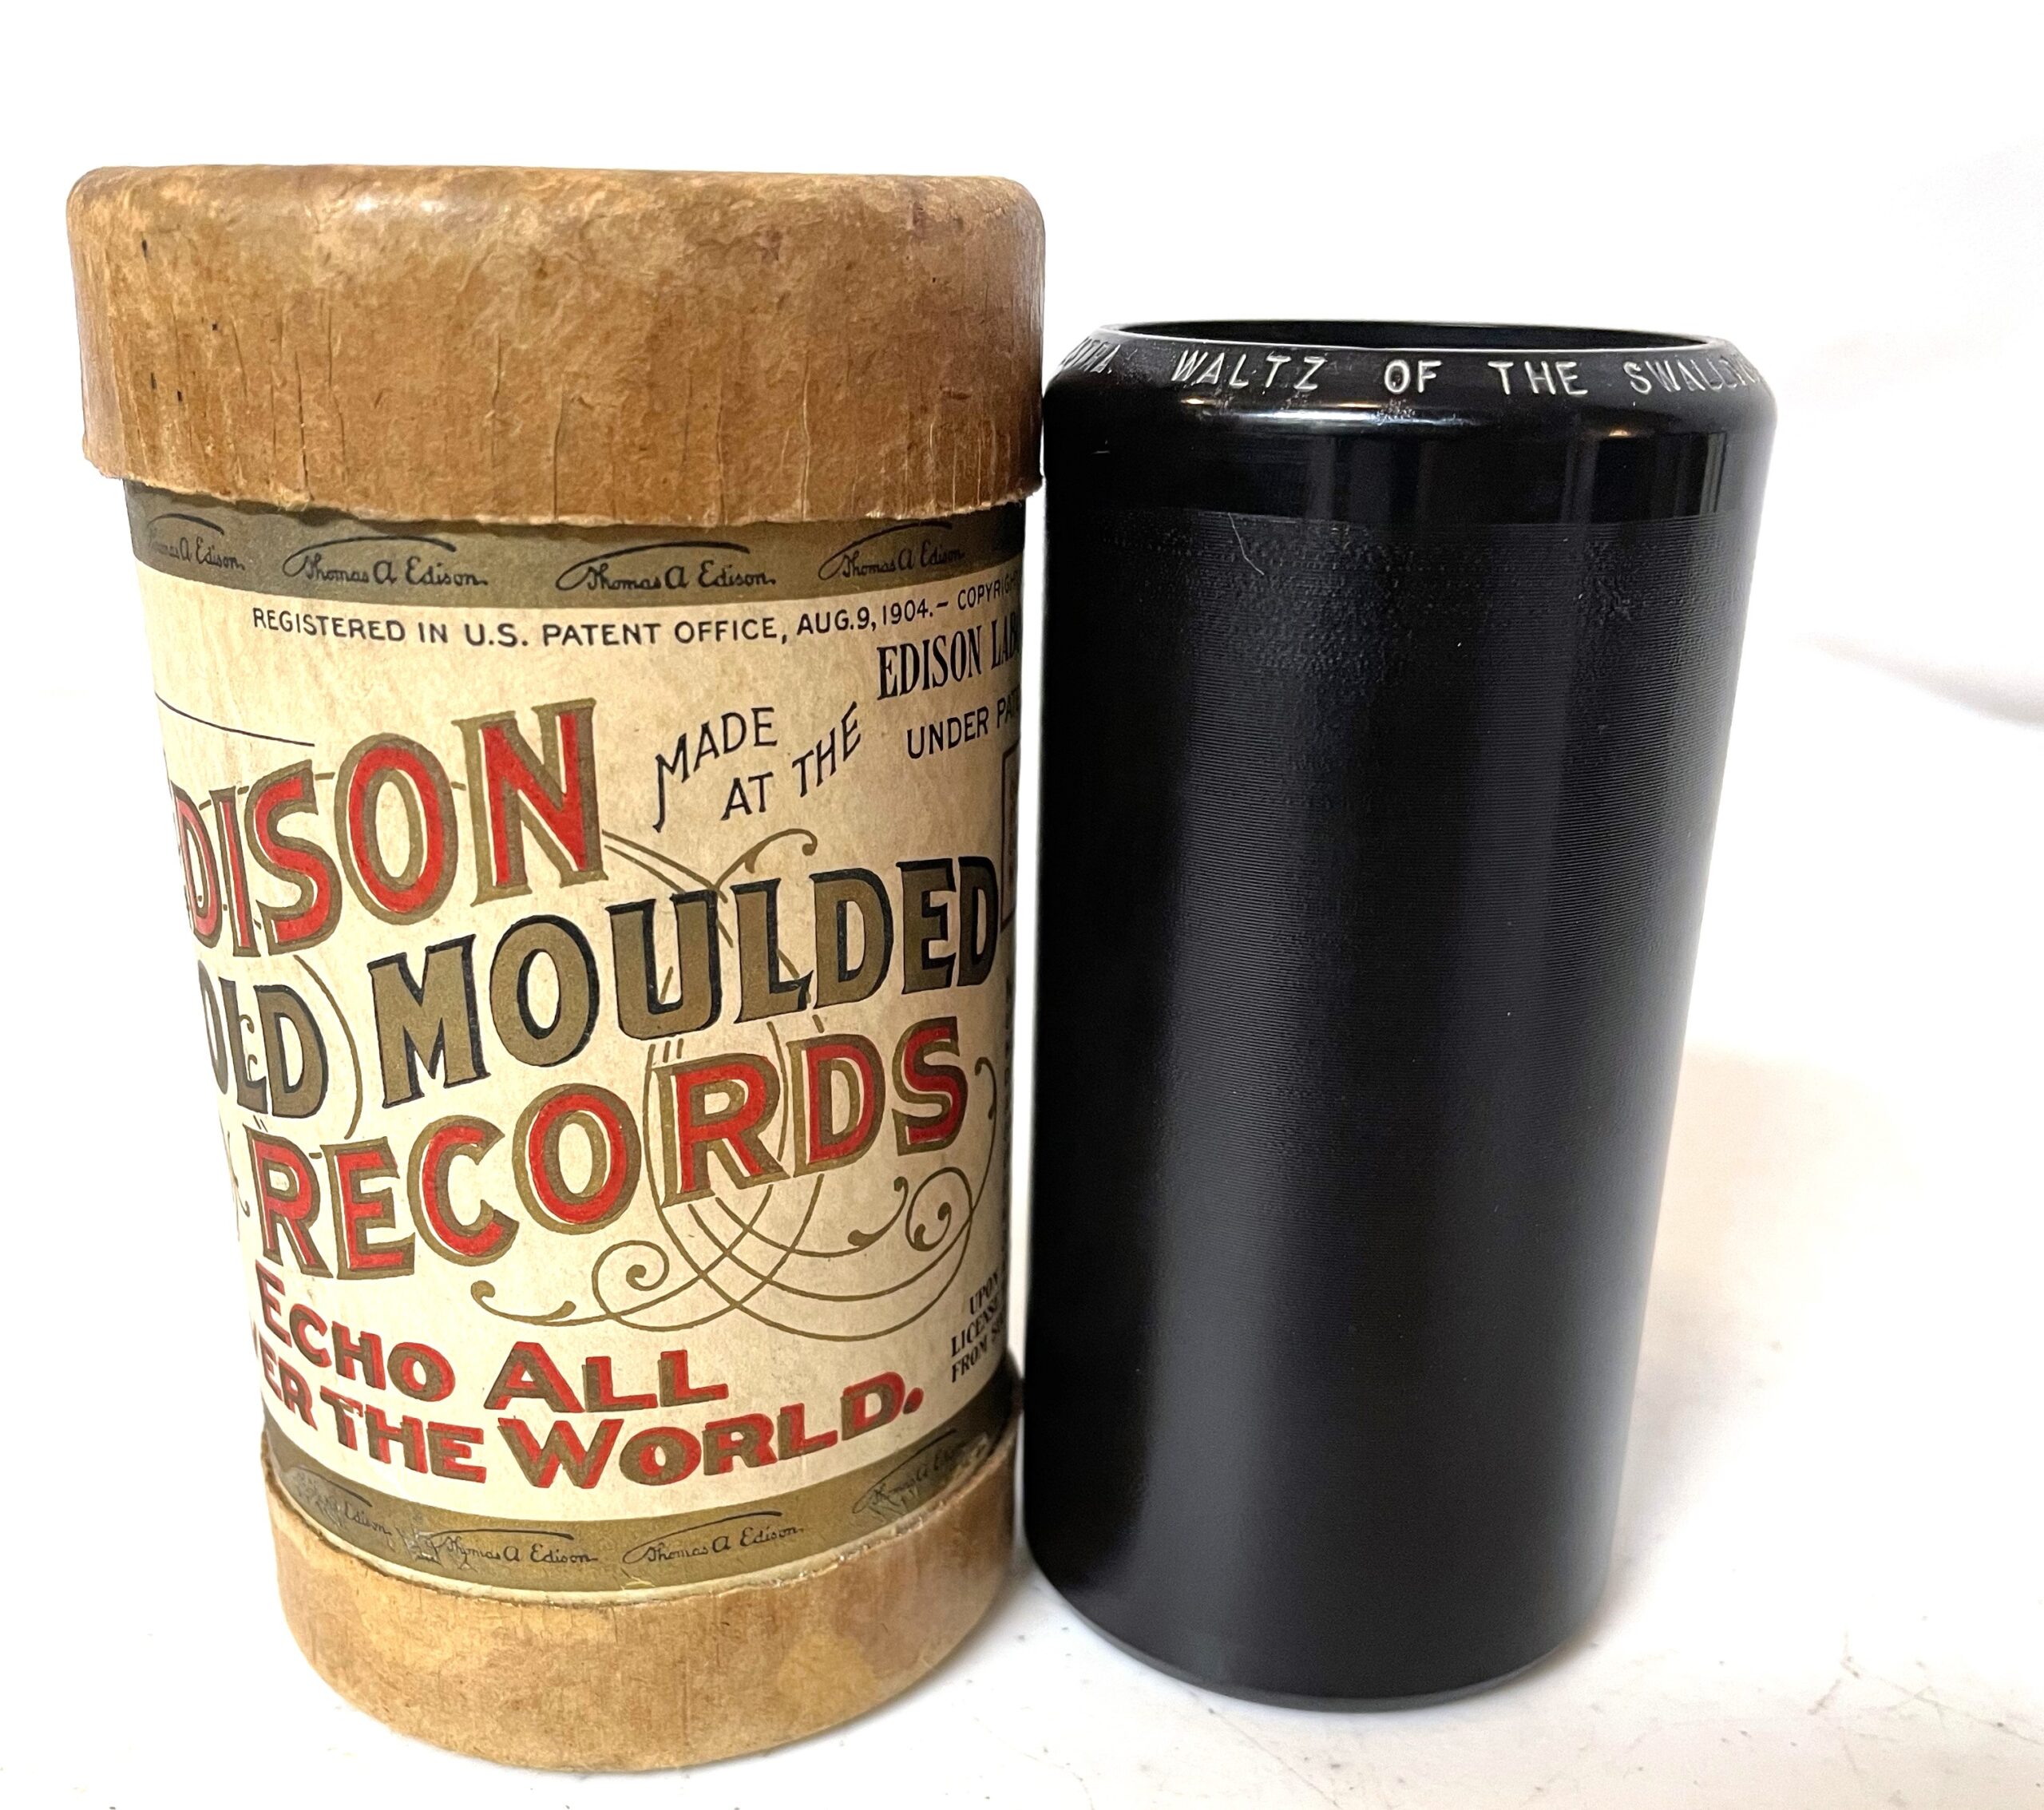 Edison 2-minute Cylinder…”You’re a Grand Old Flag”